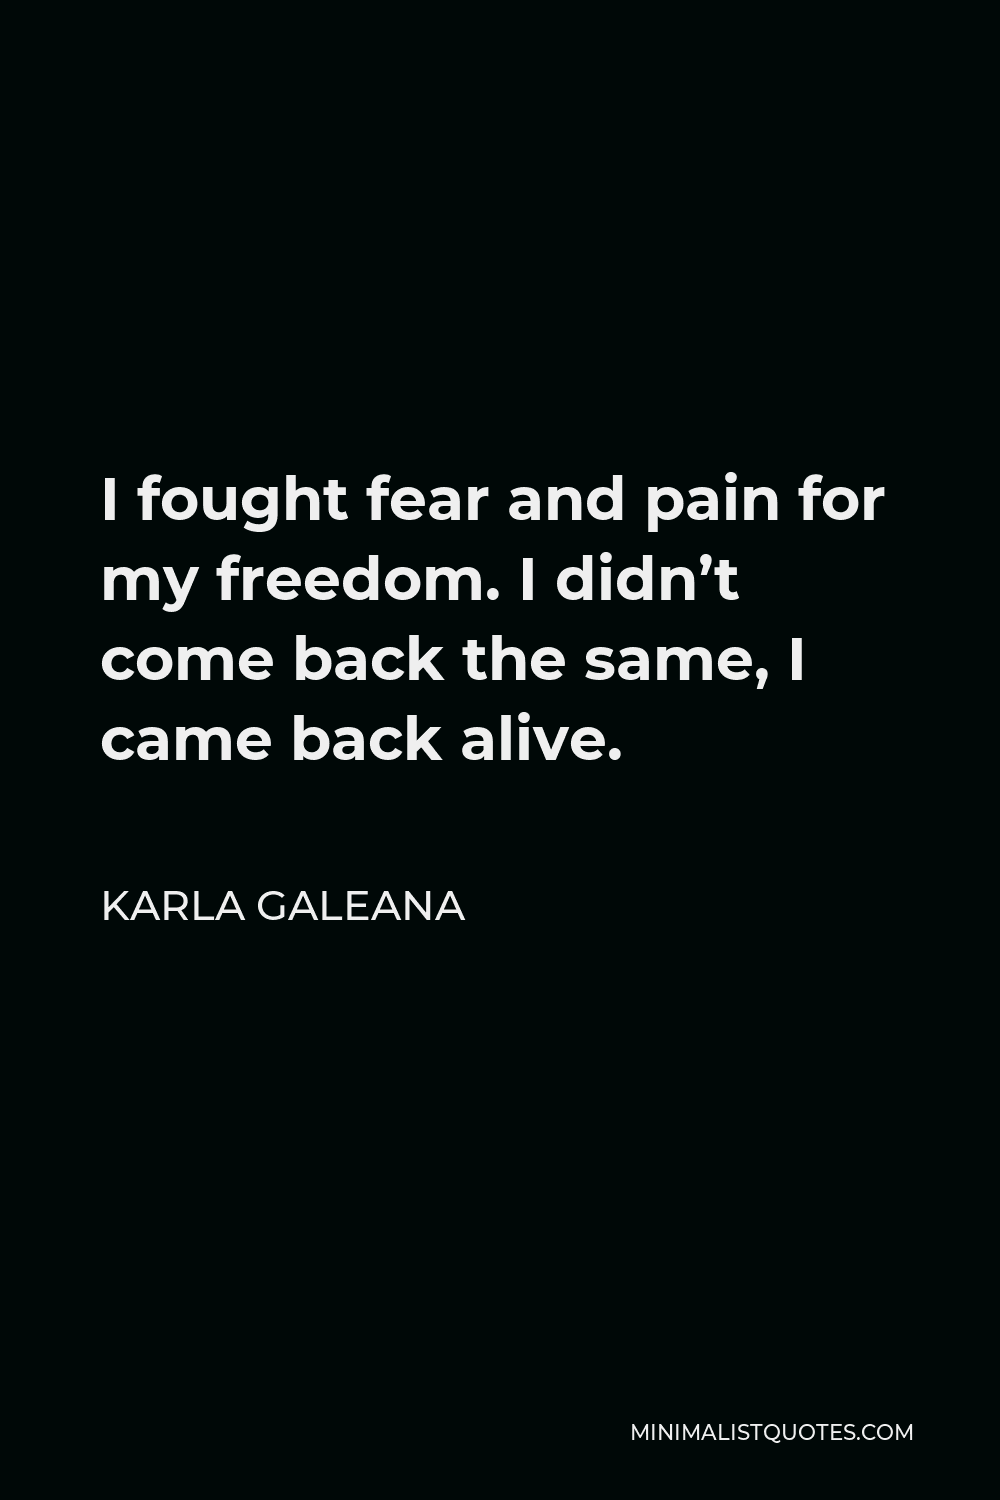 Karla Galeana Quote - I fought fear and pain for my freedom. I didn’t come back the same, I came back alive.